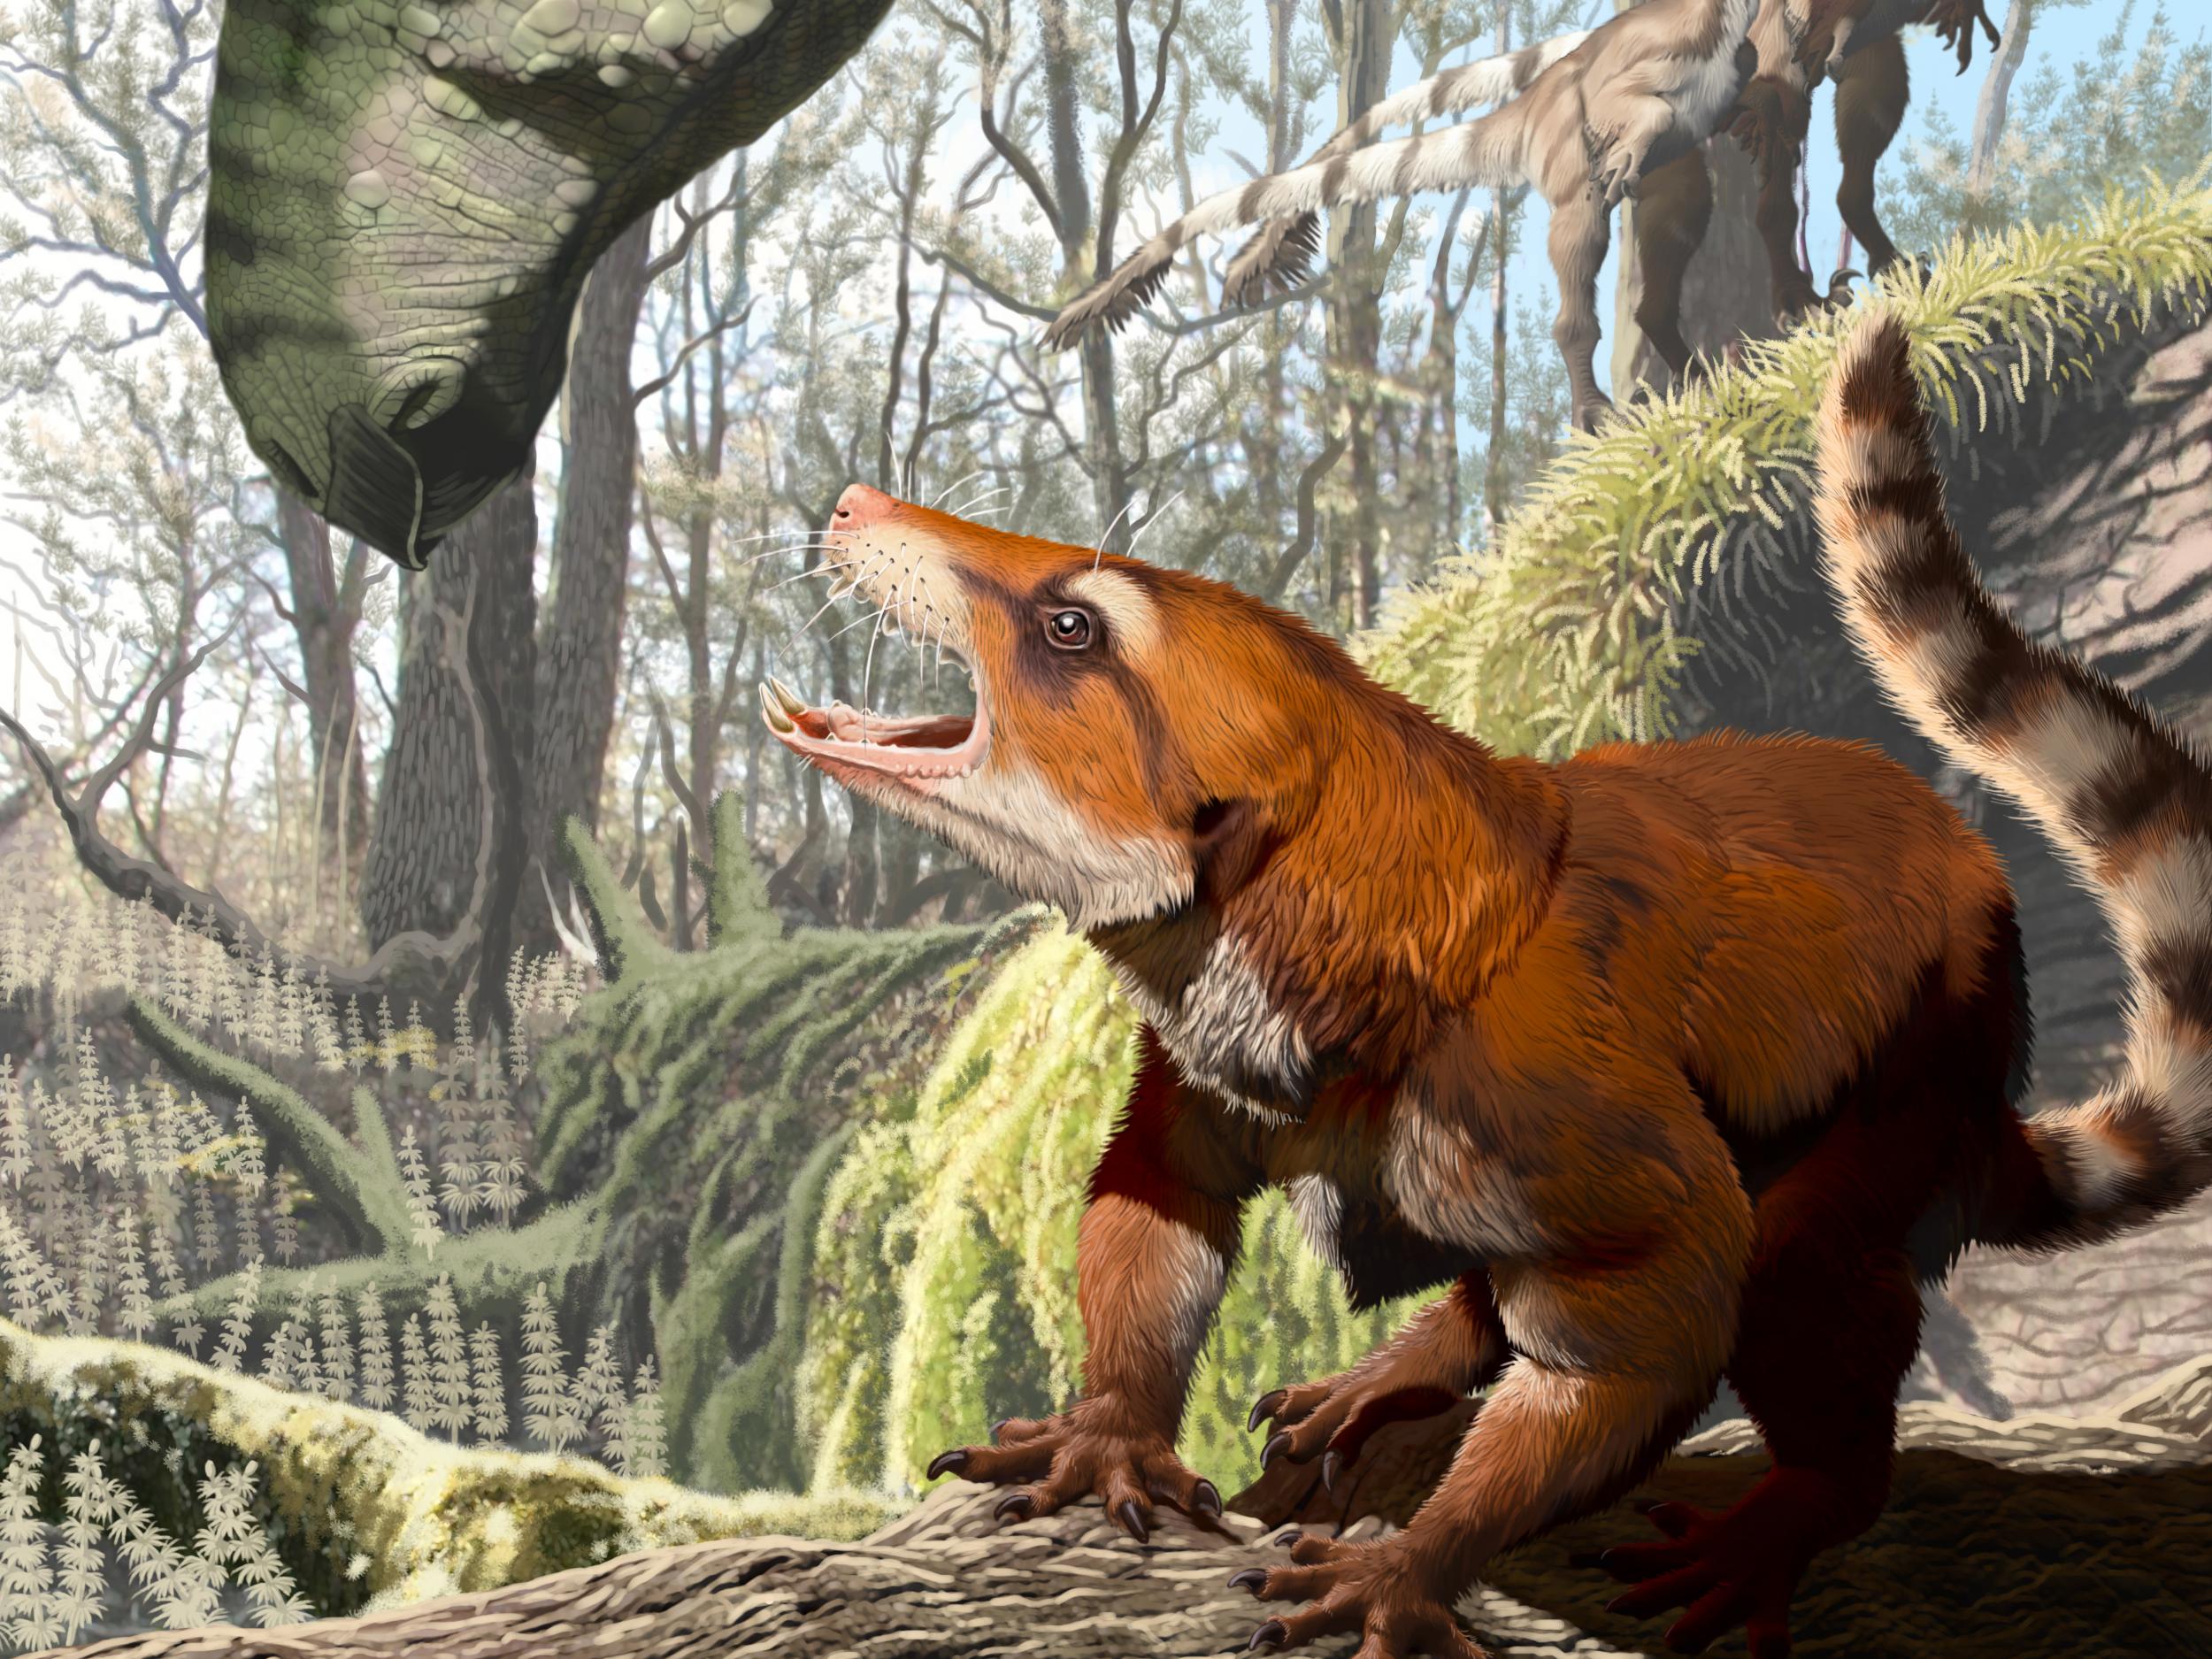 The new species Cifelliodon wahkarmoosuch lived at the time of the dinosaurs and probably grew to be about the size of a small hare